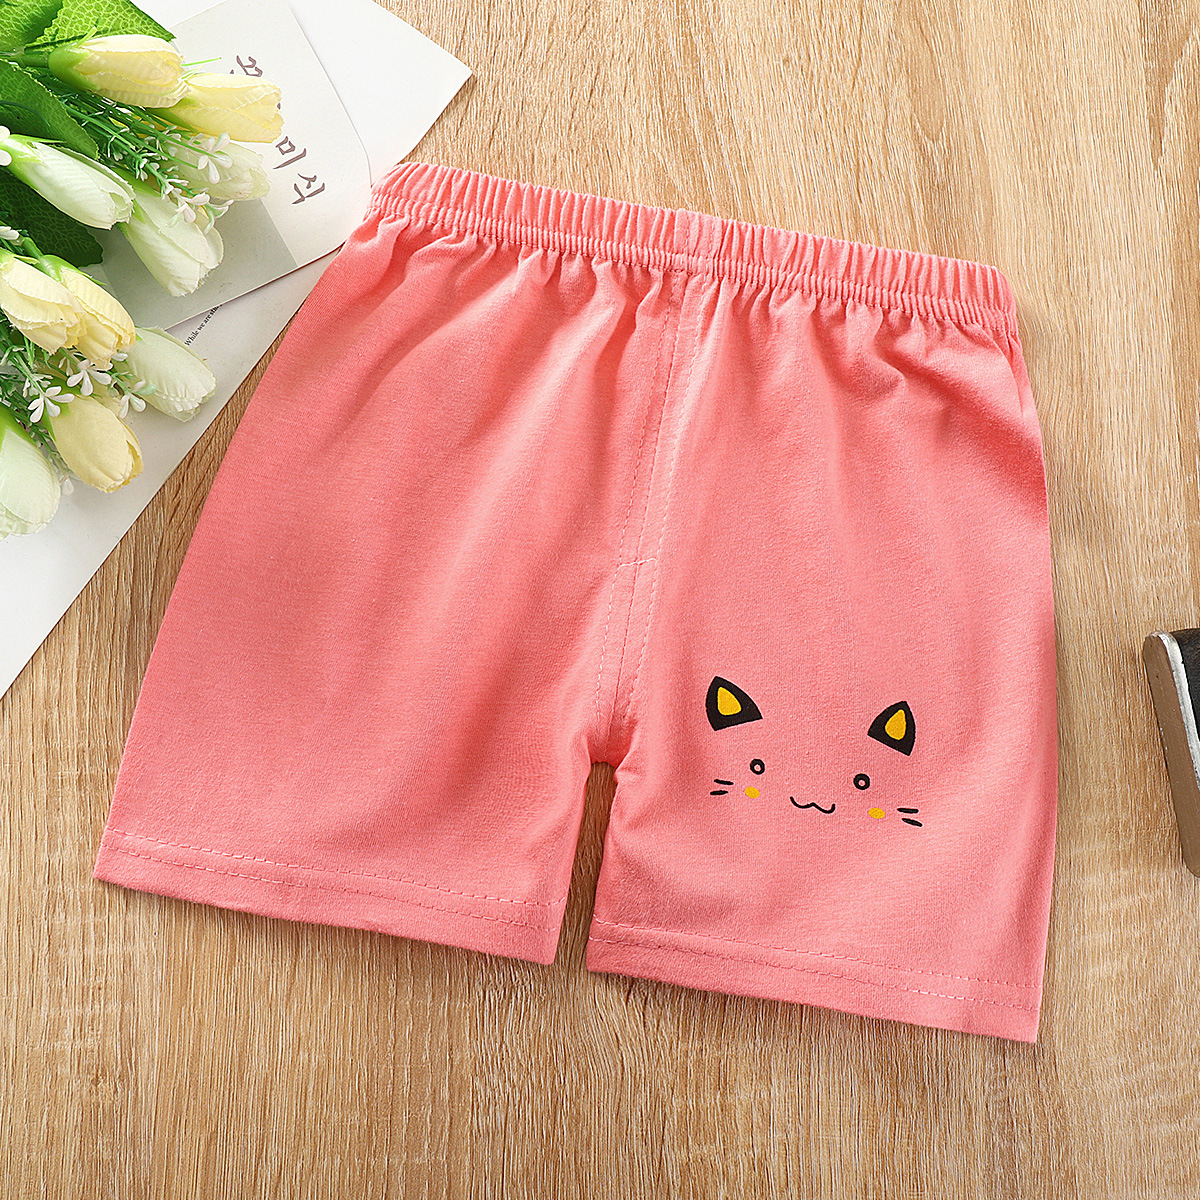 Kids Cotton Shorts Cute Cartoon Printing Summer Breathable Casual Short Pants For 0-7 Years Old Boys Girls Watermelon Red Cat Head 1-2Y 55#80CM